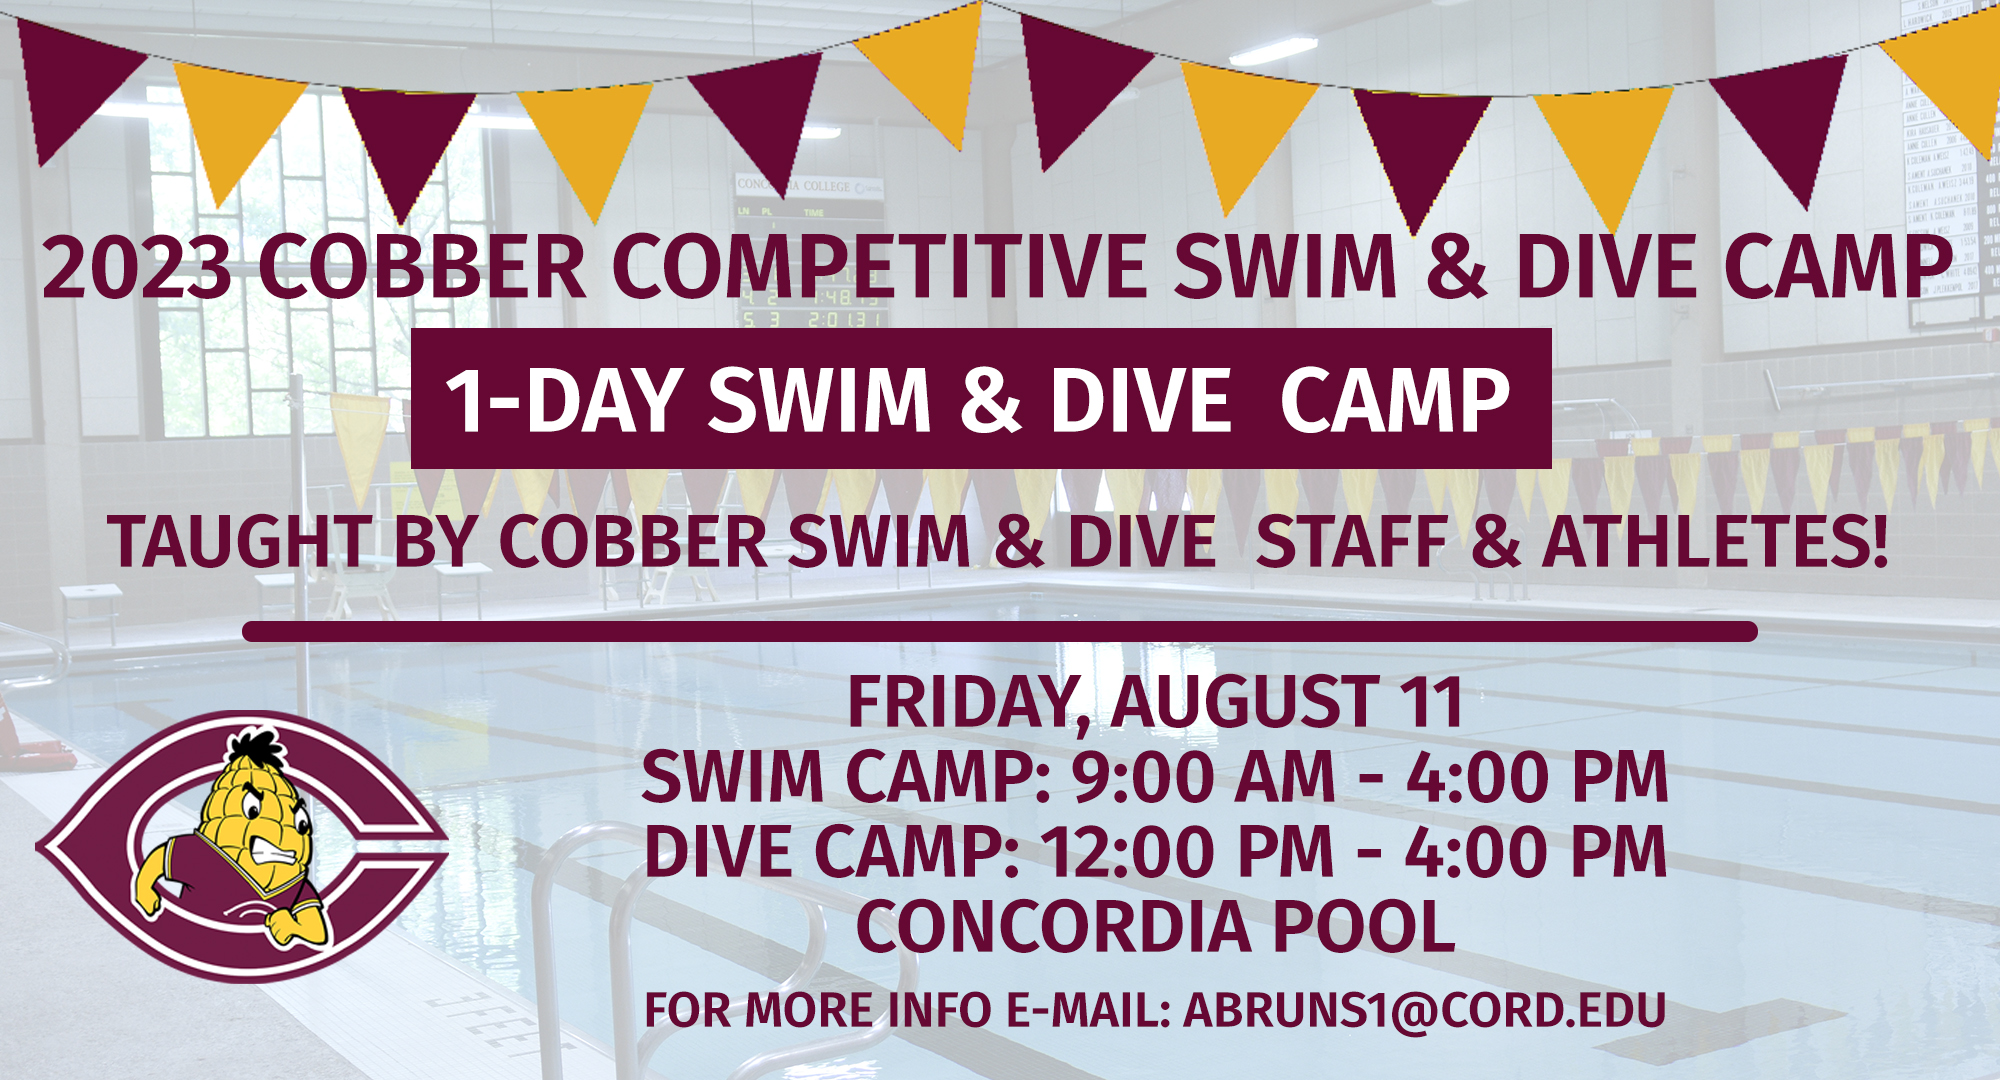 Cobber Swim & Dive will be hosting the 3rd annual Cobber Competitive Swim & Dive Camp on Friday, Aug. 11.